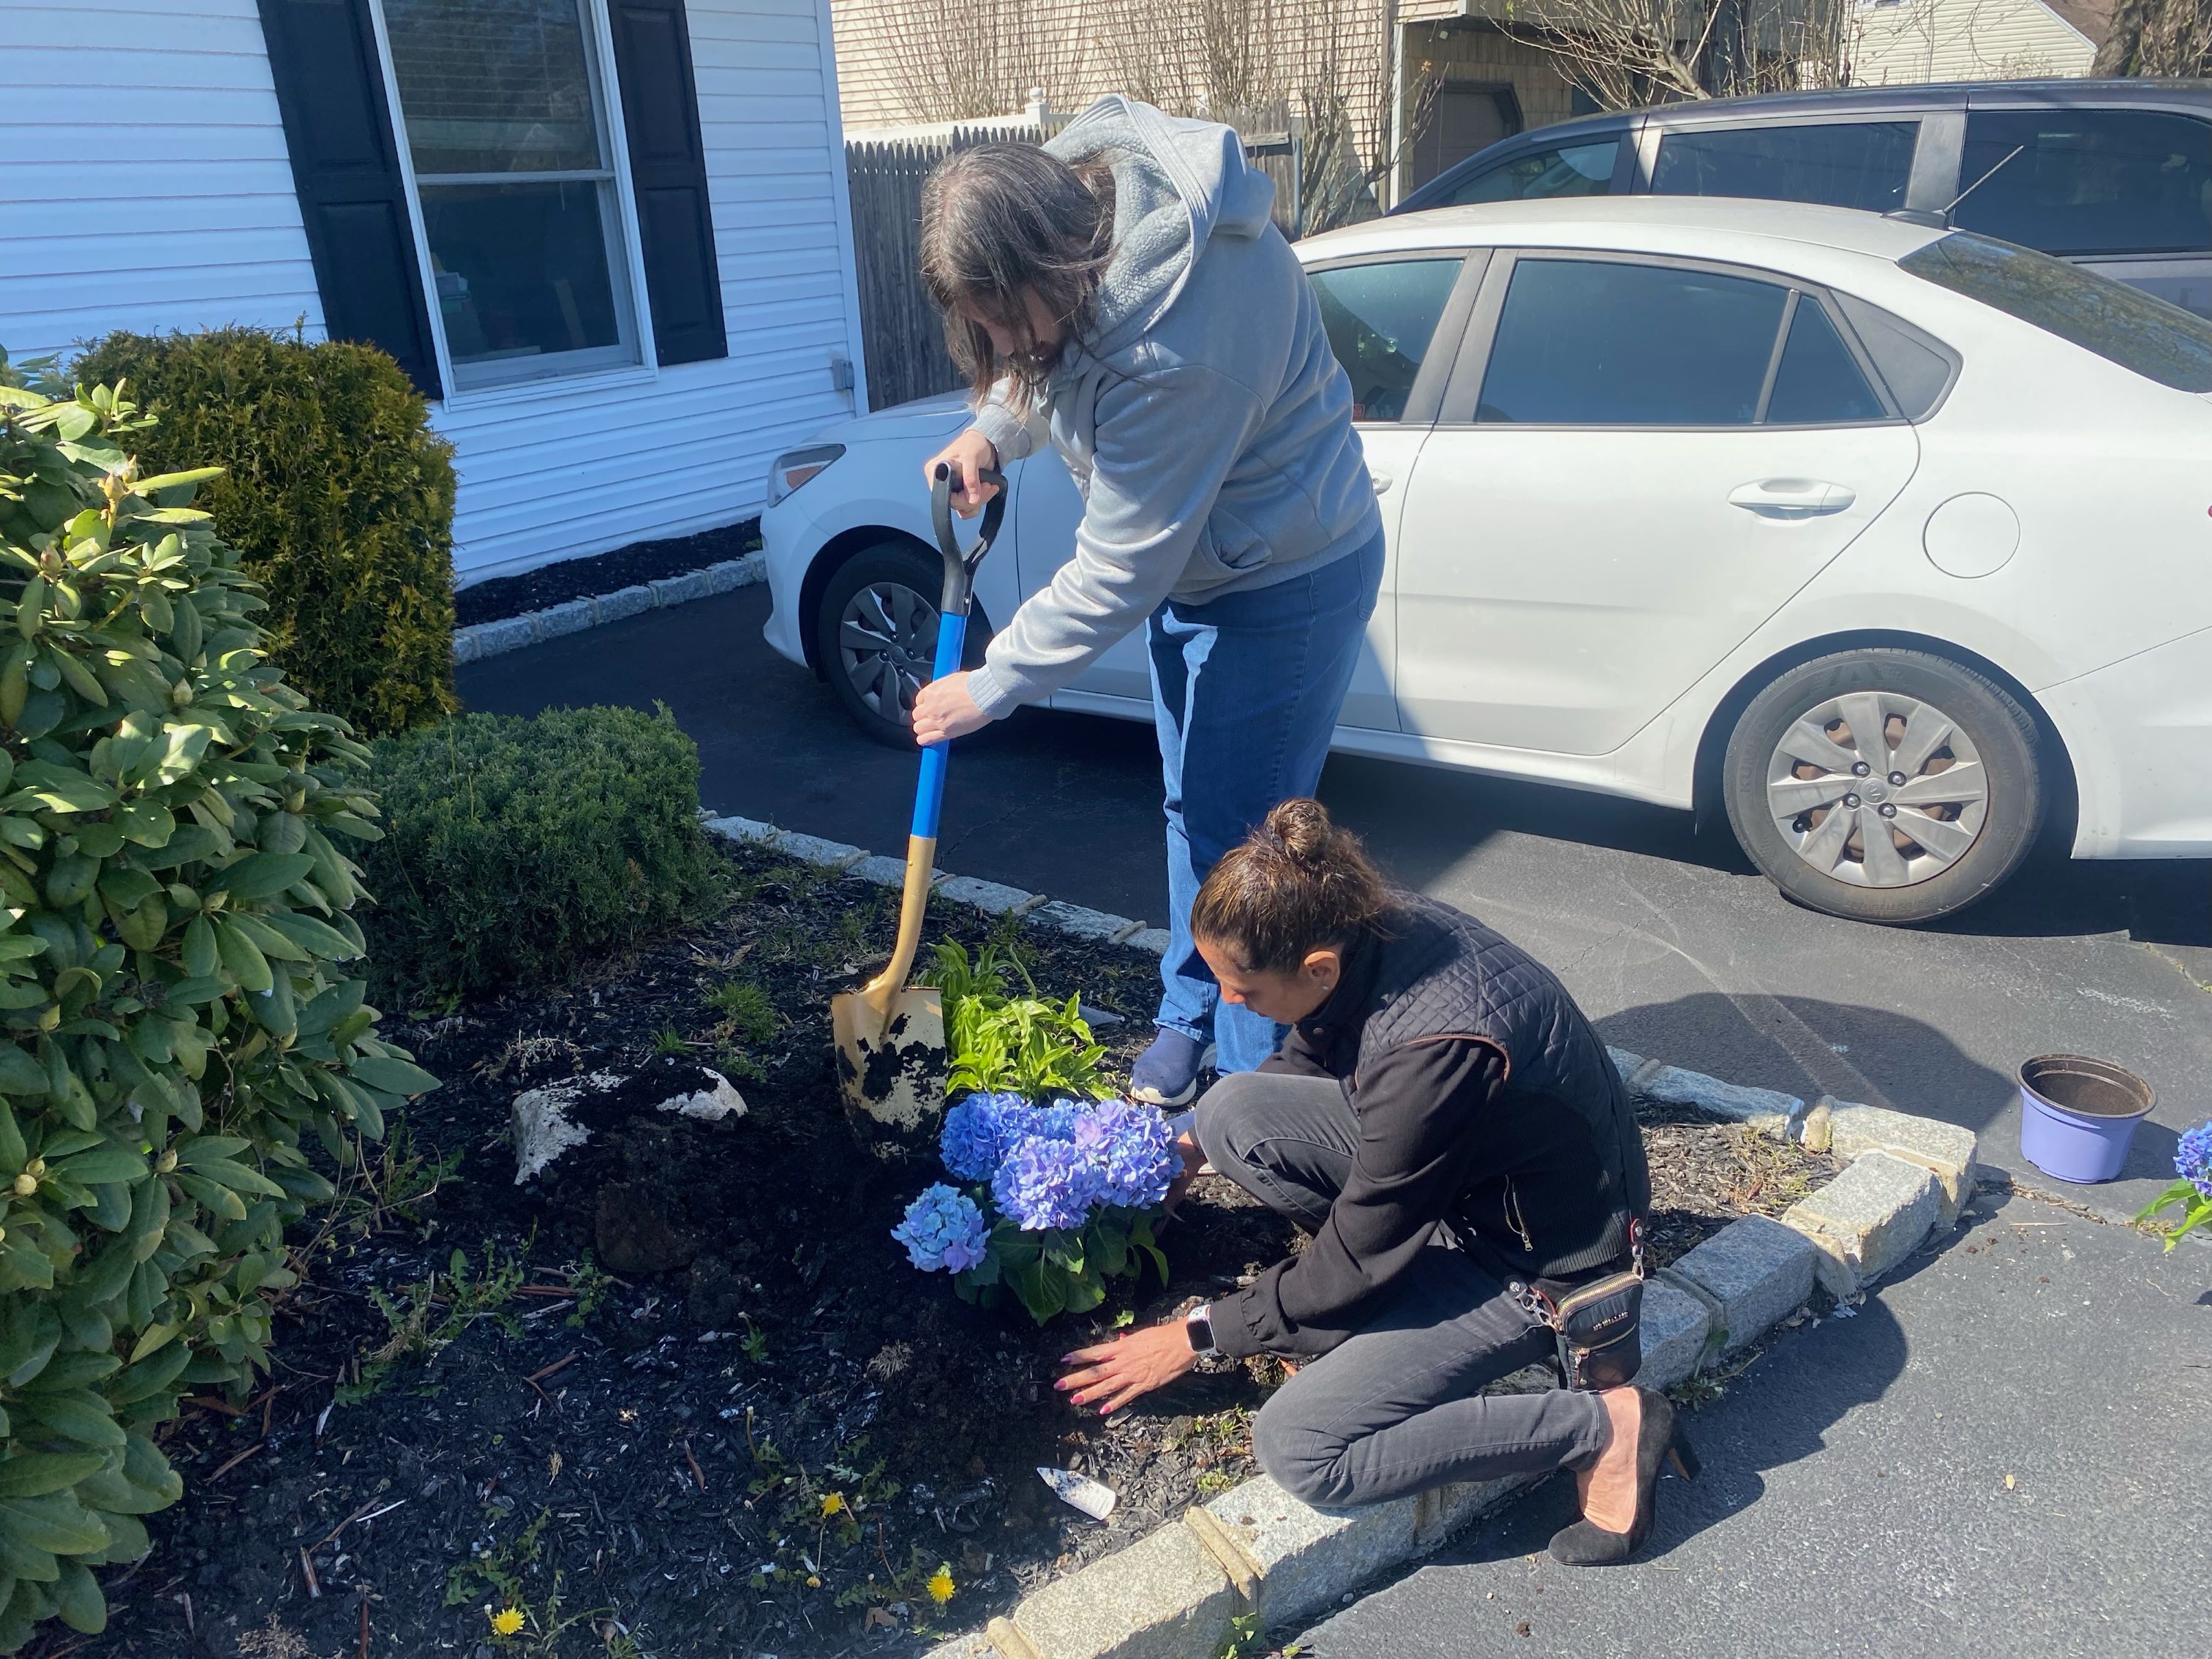 Senator Martinez plants flowers with residents and staff of Life's Work in Bay Shore